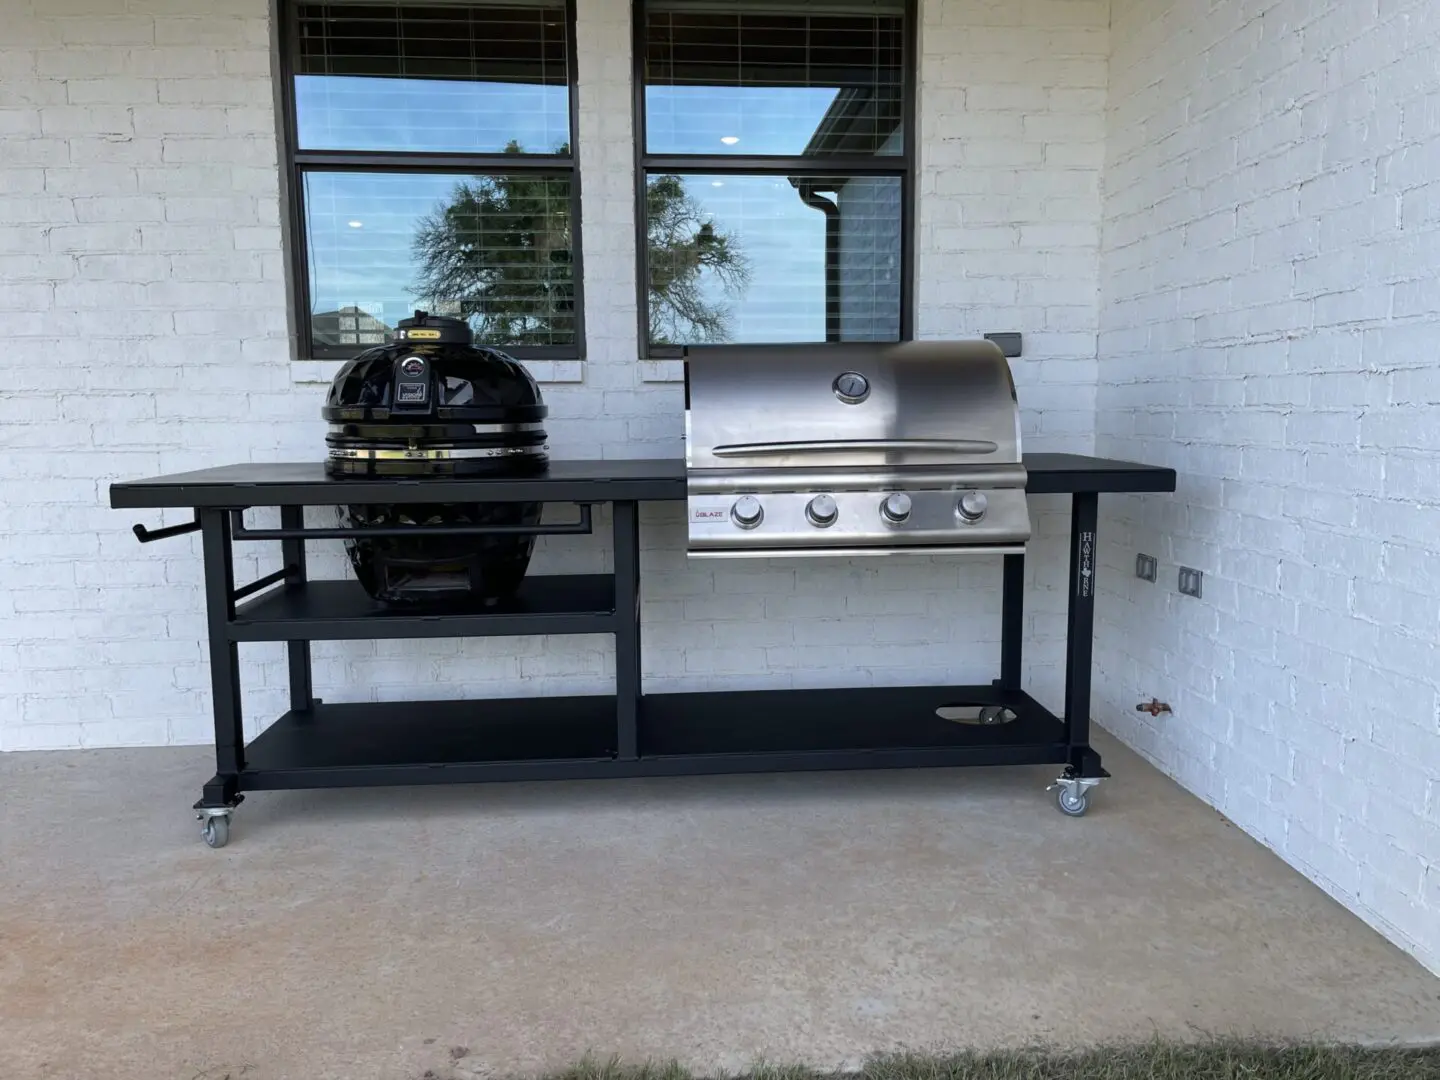 Custom tables built to accommodate Blaze Grills